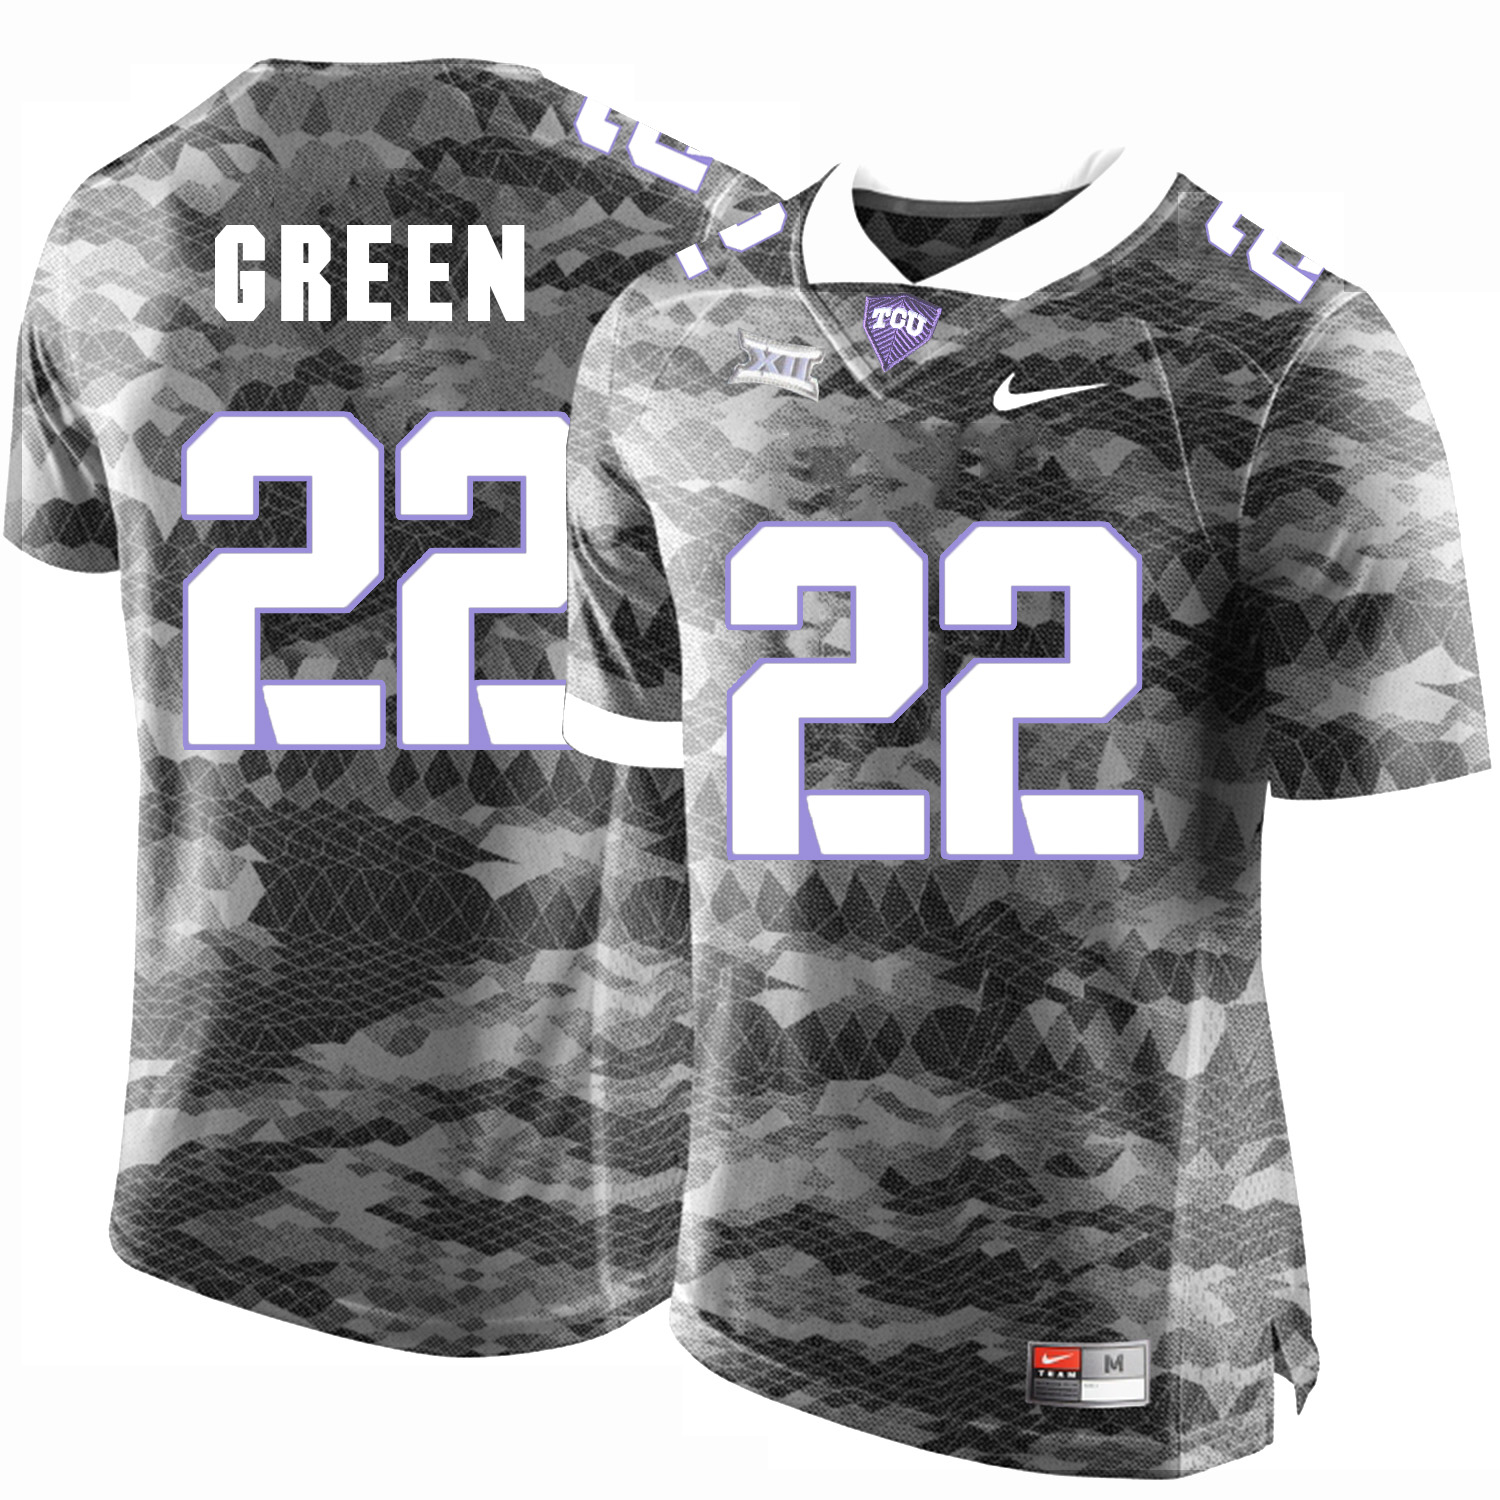 TCU Horned Frogs 22 Aaron Green Gray College Football Limited Jersey